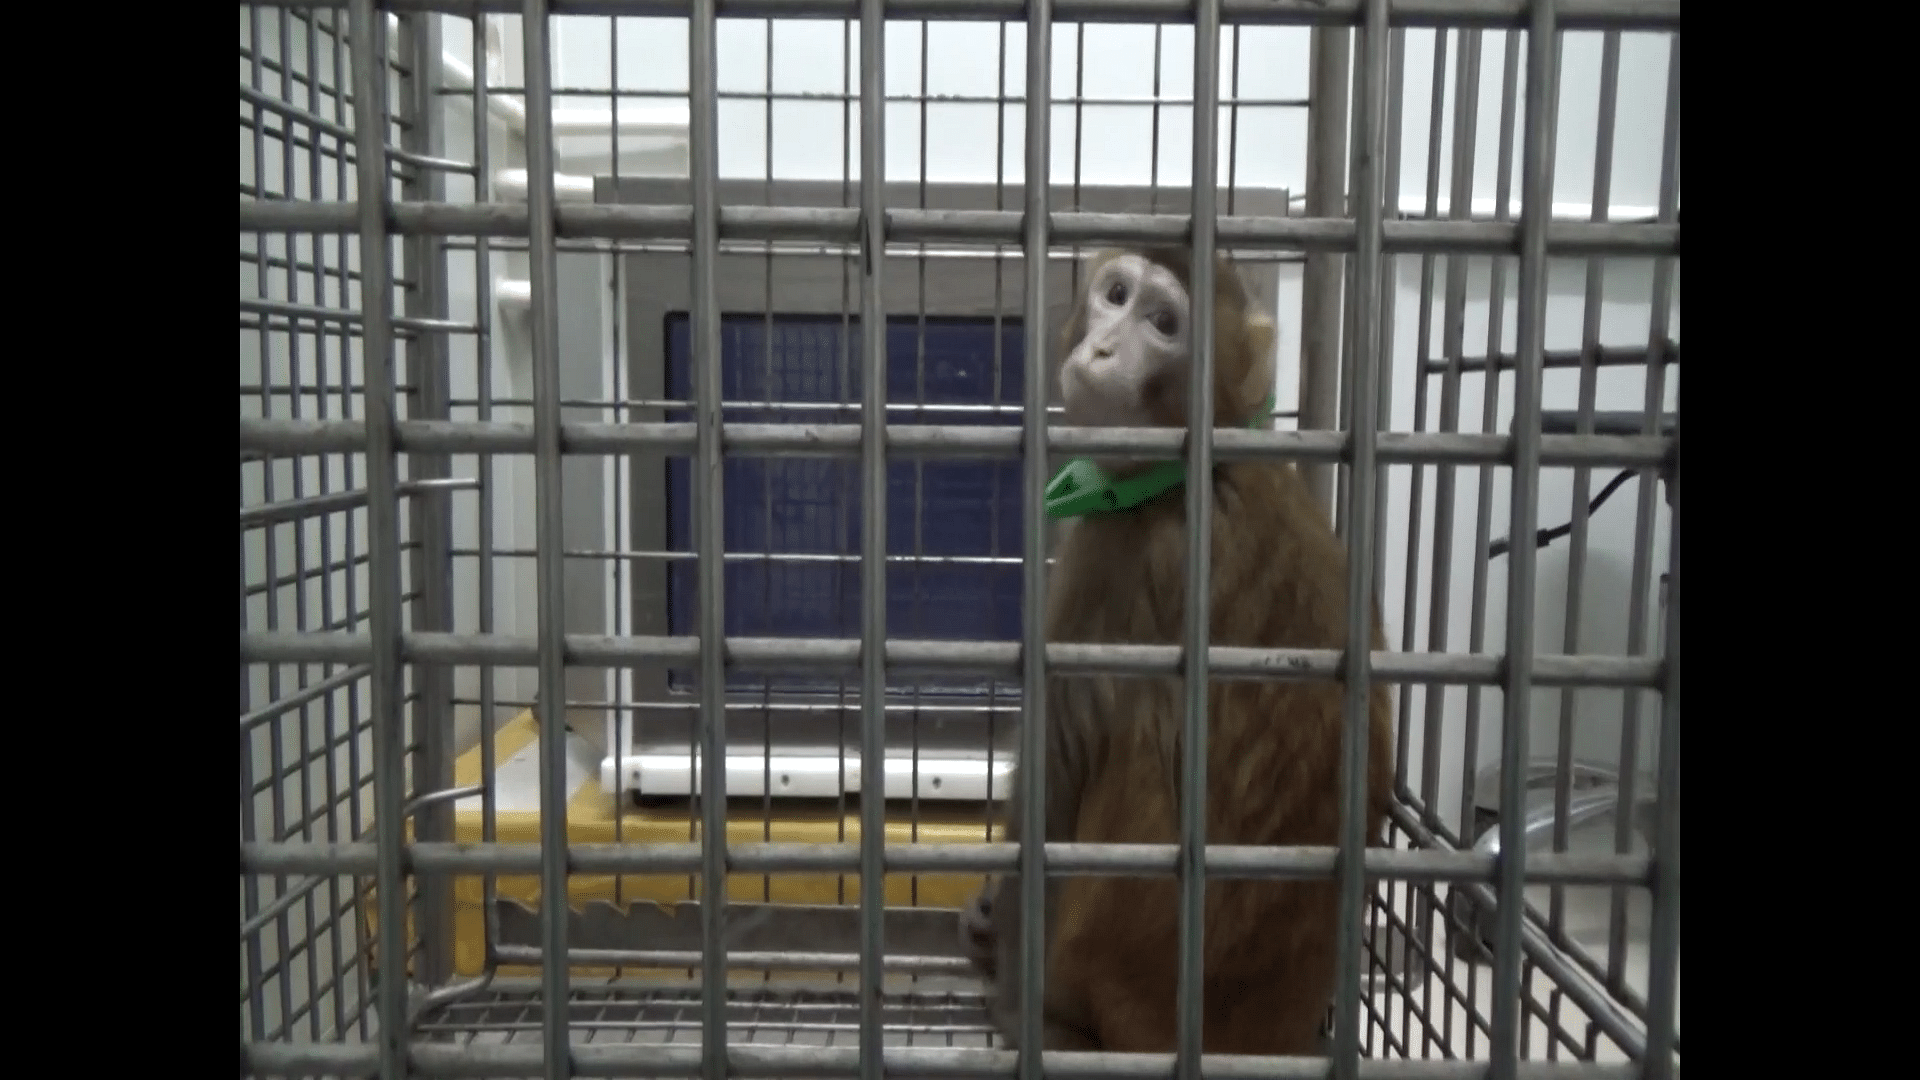 One of the transgenic monkeys during a brain measurement test.